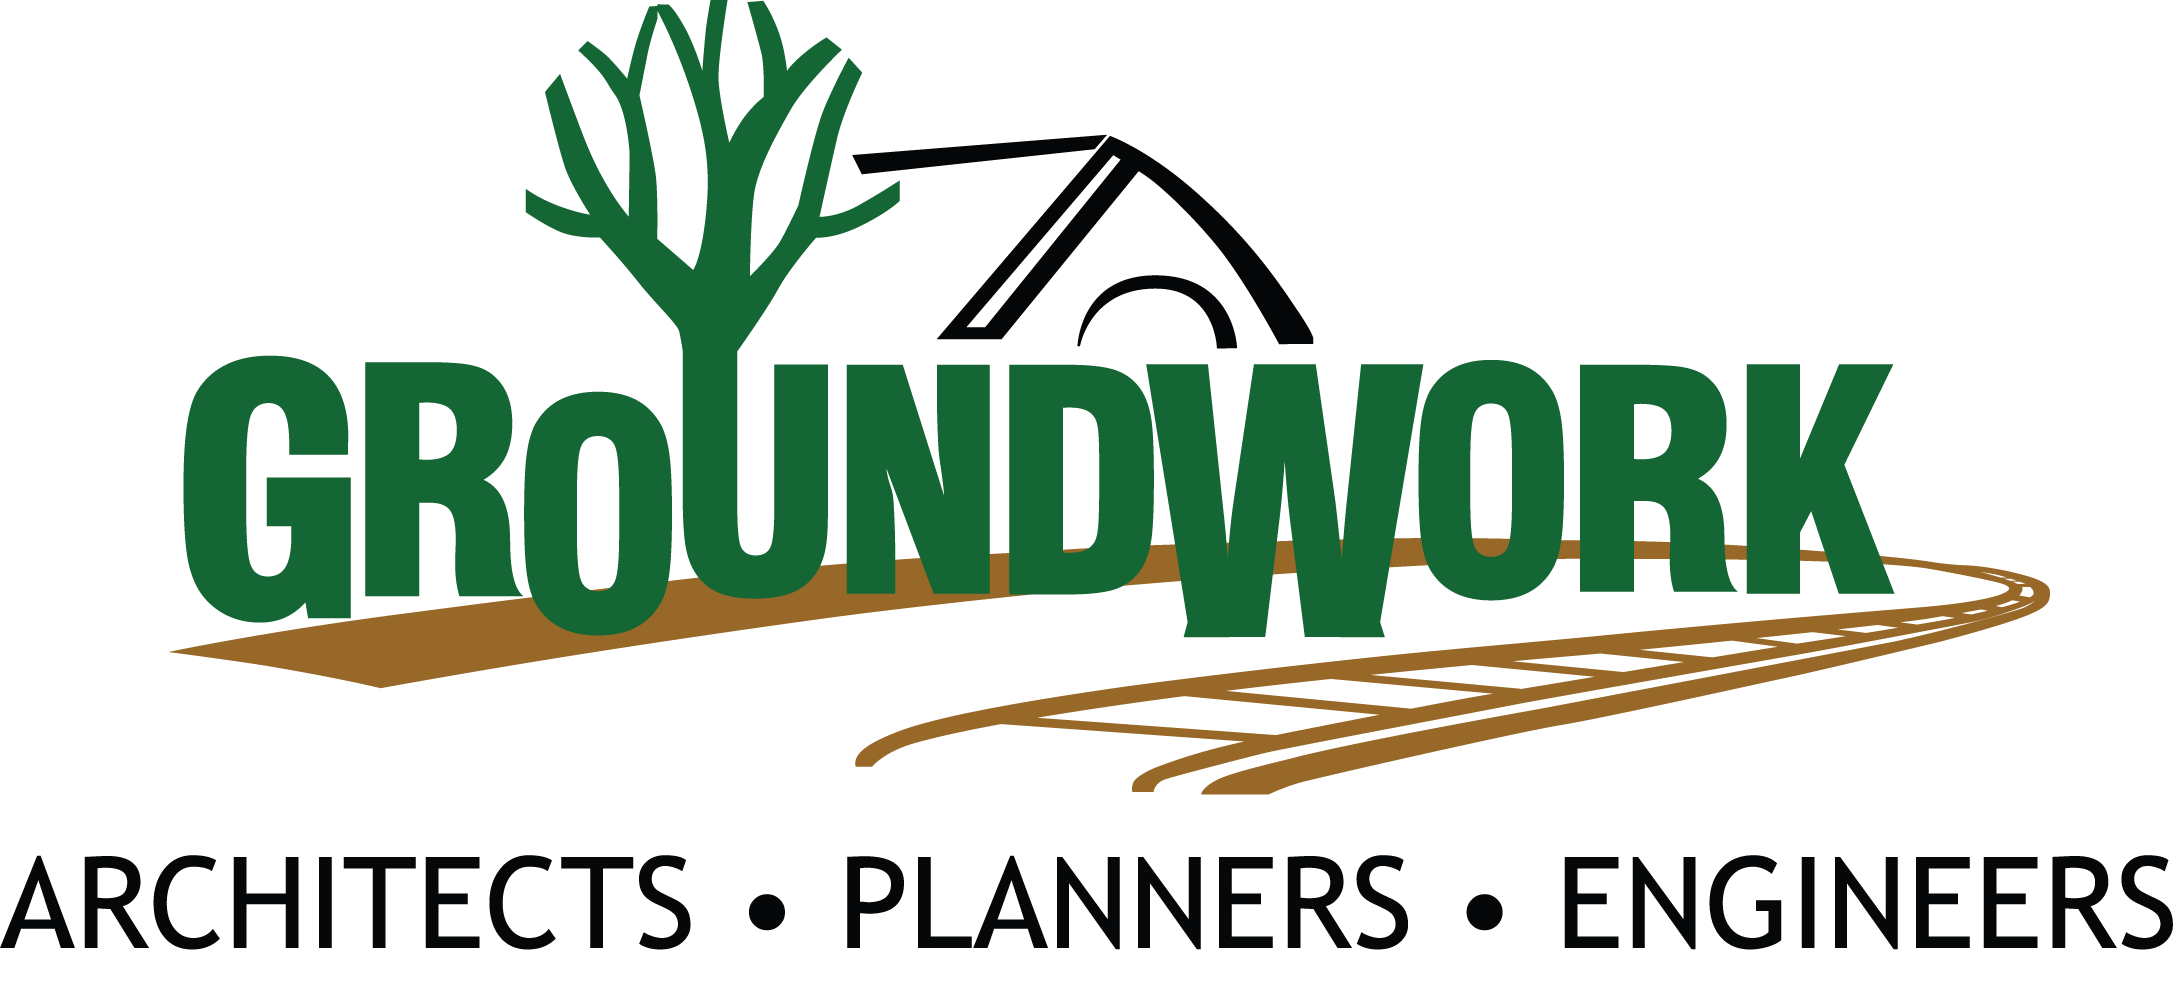 Click on the image to visit the website of GROUNDWORK, Ltd